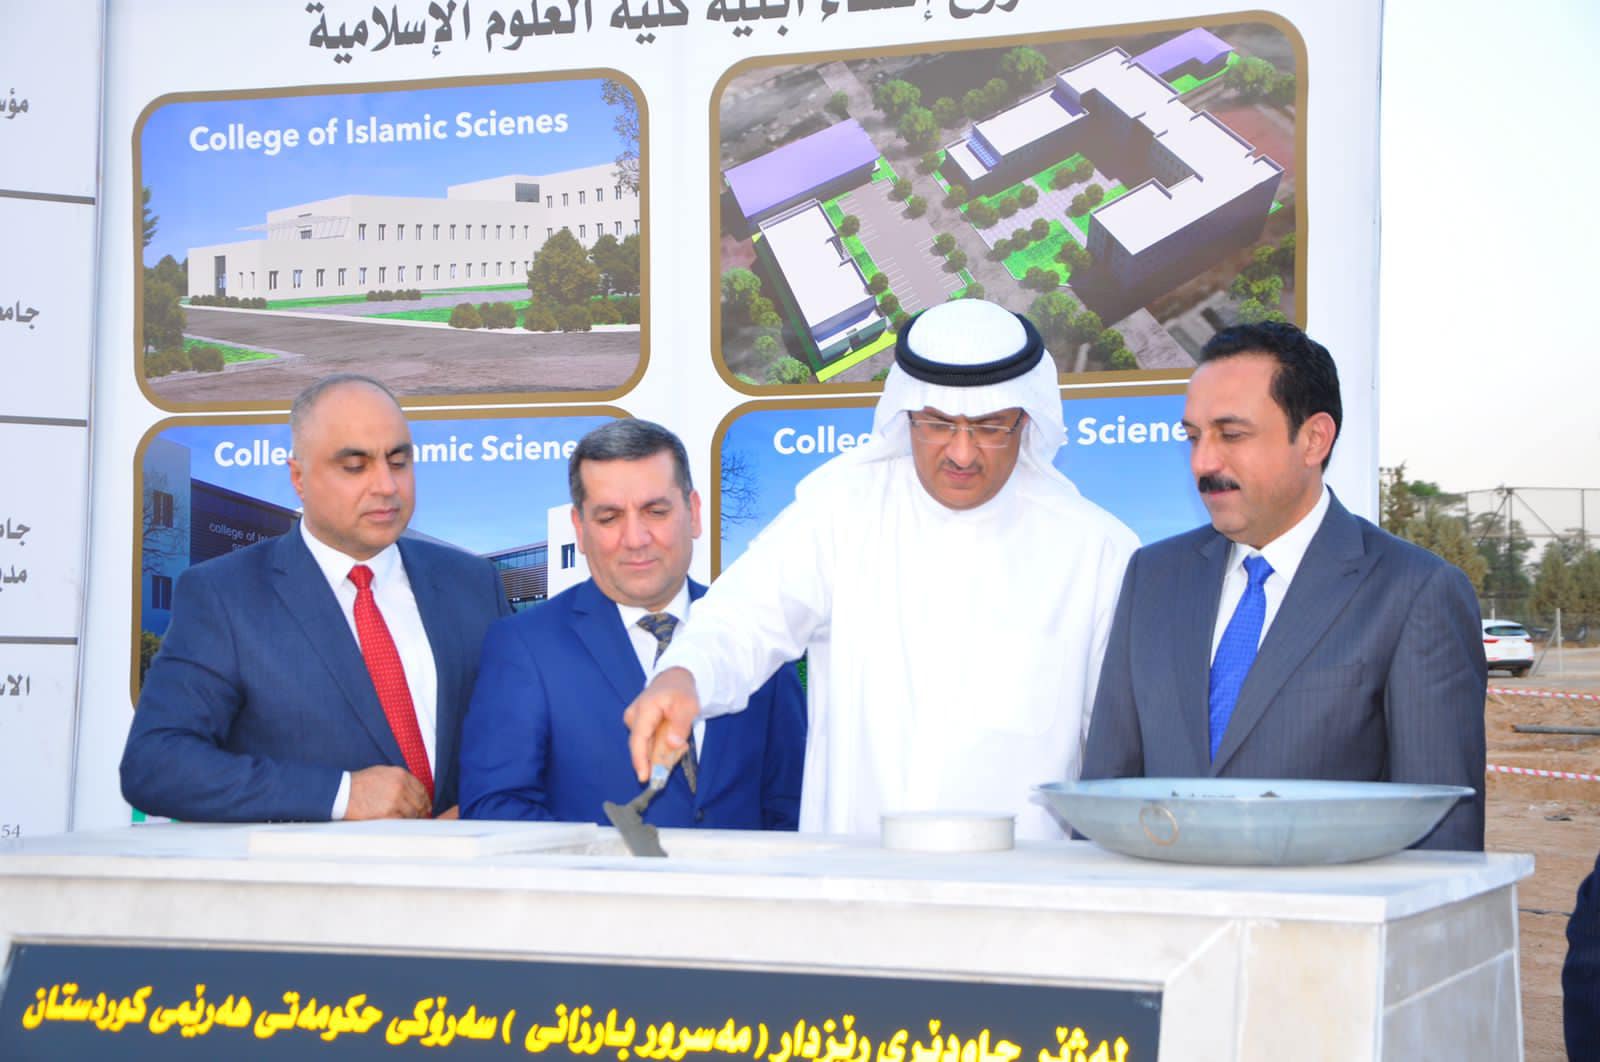 The Consul General of the State of Kuwait in Irbil lays the foundation stone for the project to build the College of Islamic studies funded by Kuwait